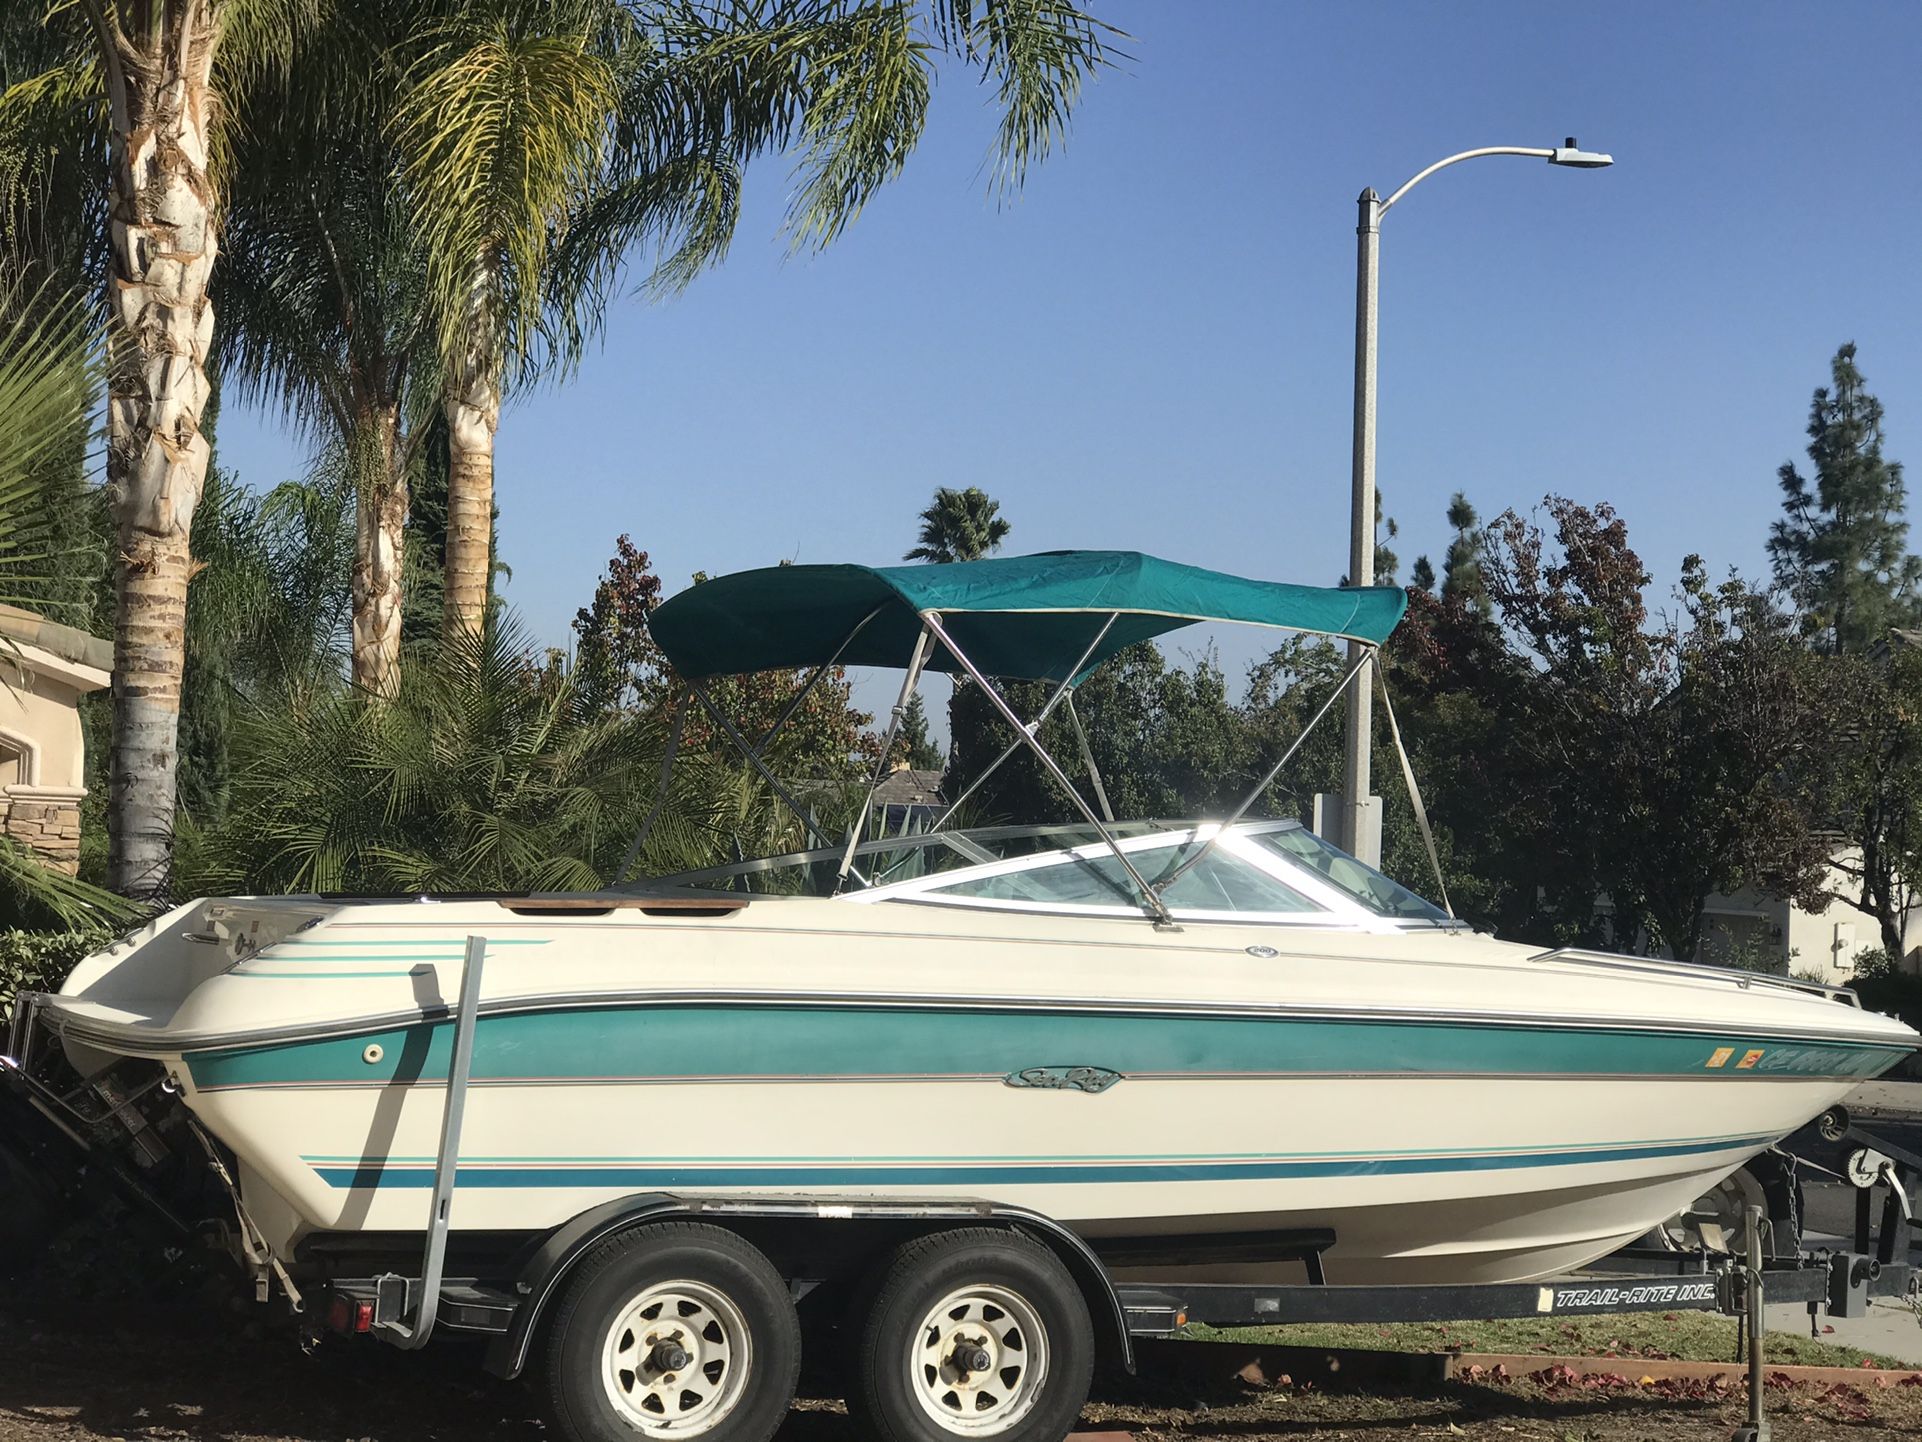 Boat With Trailer For Sale